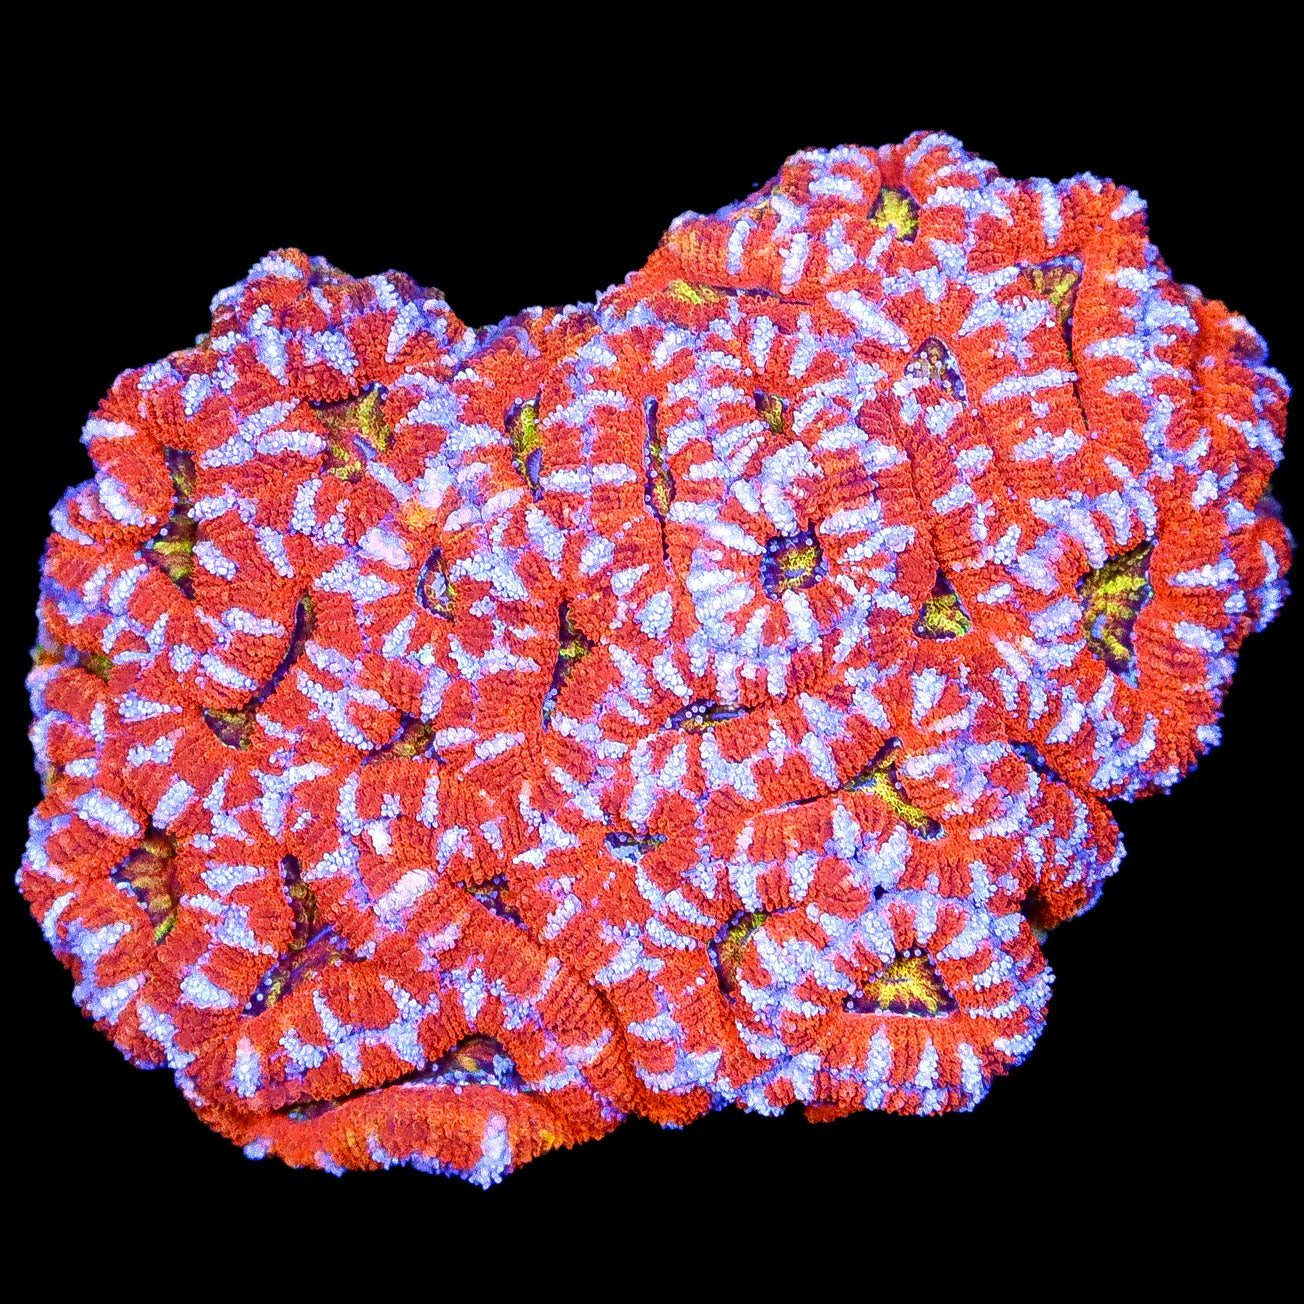 Ultra Rainbow Acan Lord Coral Colony